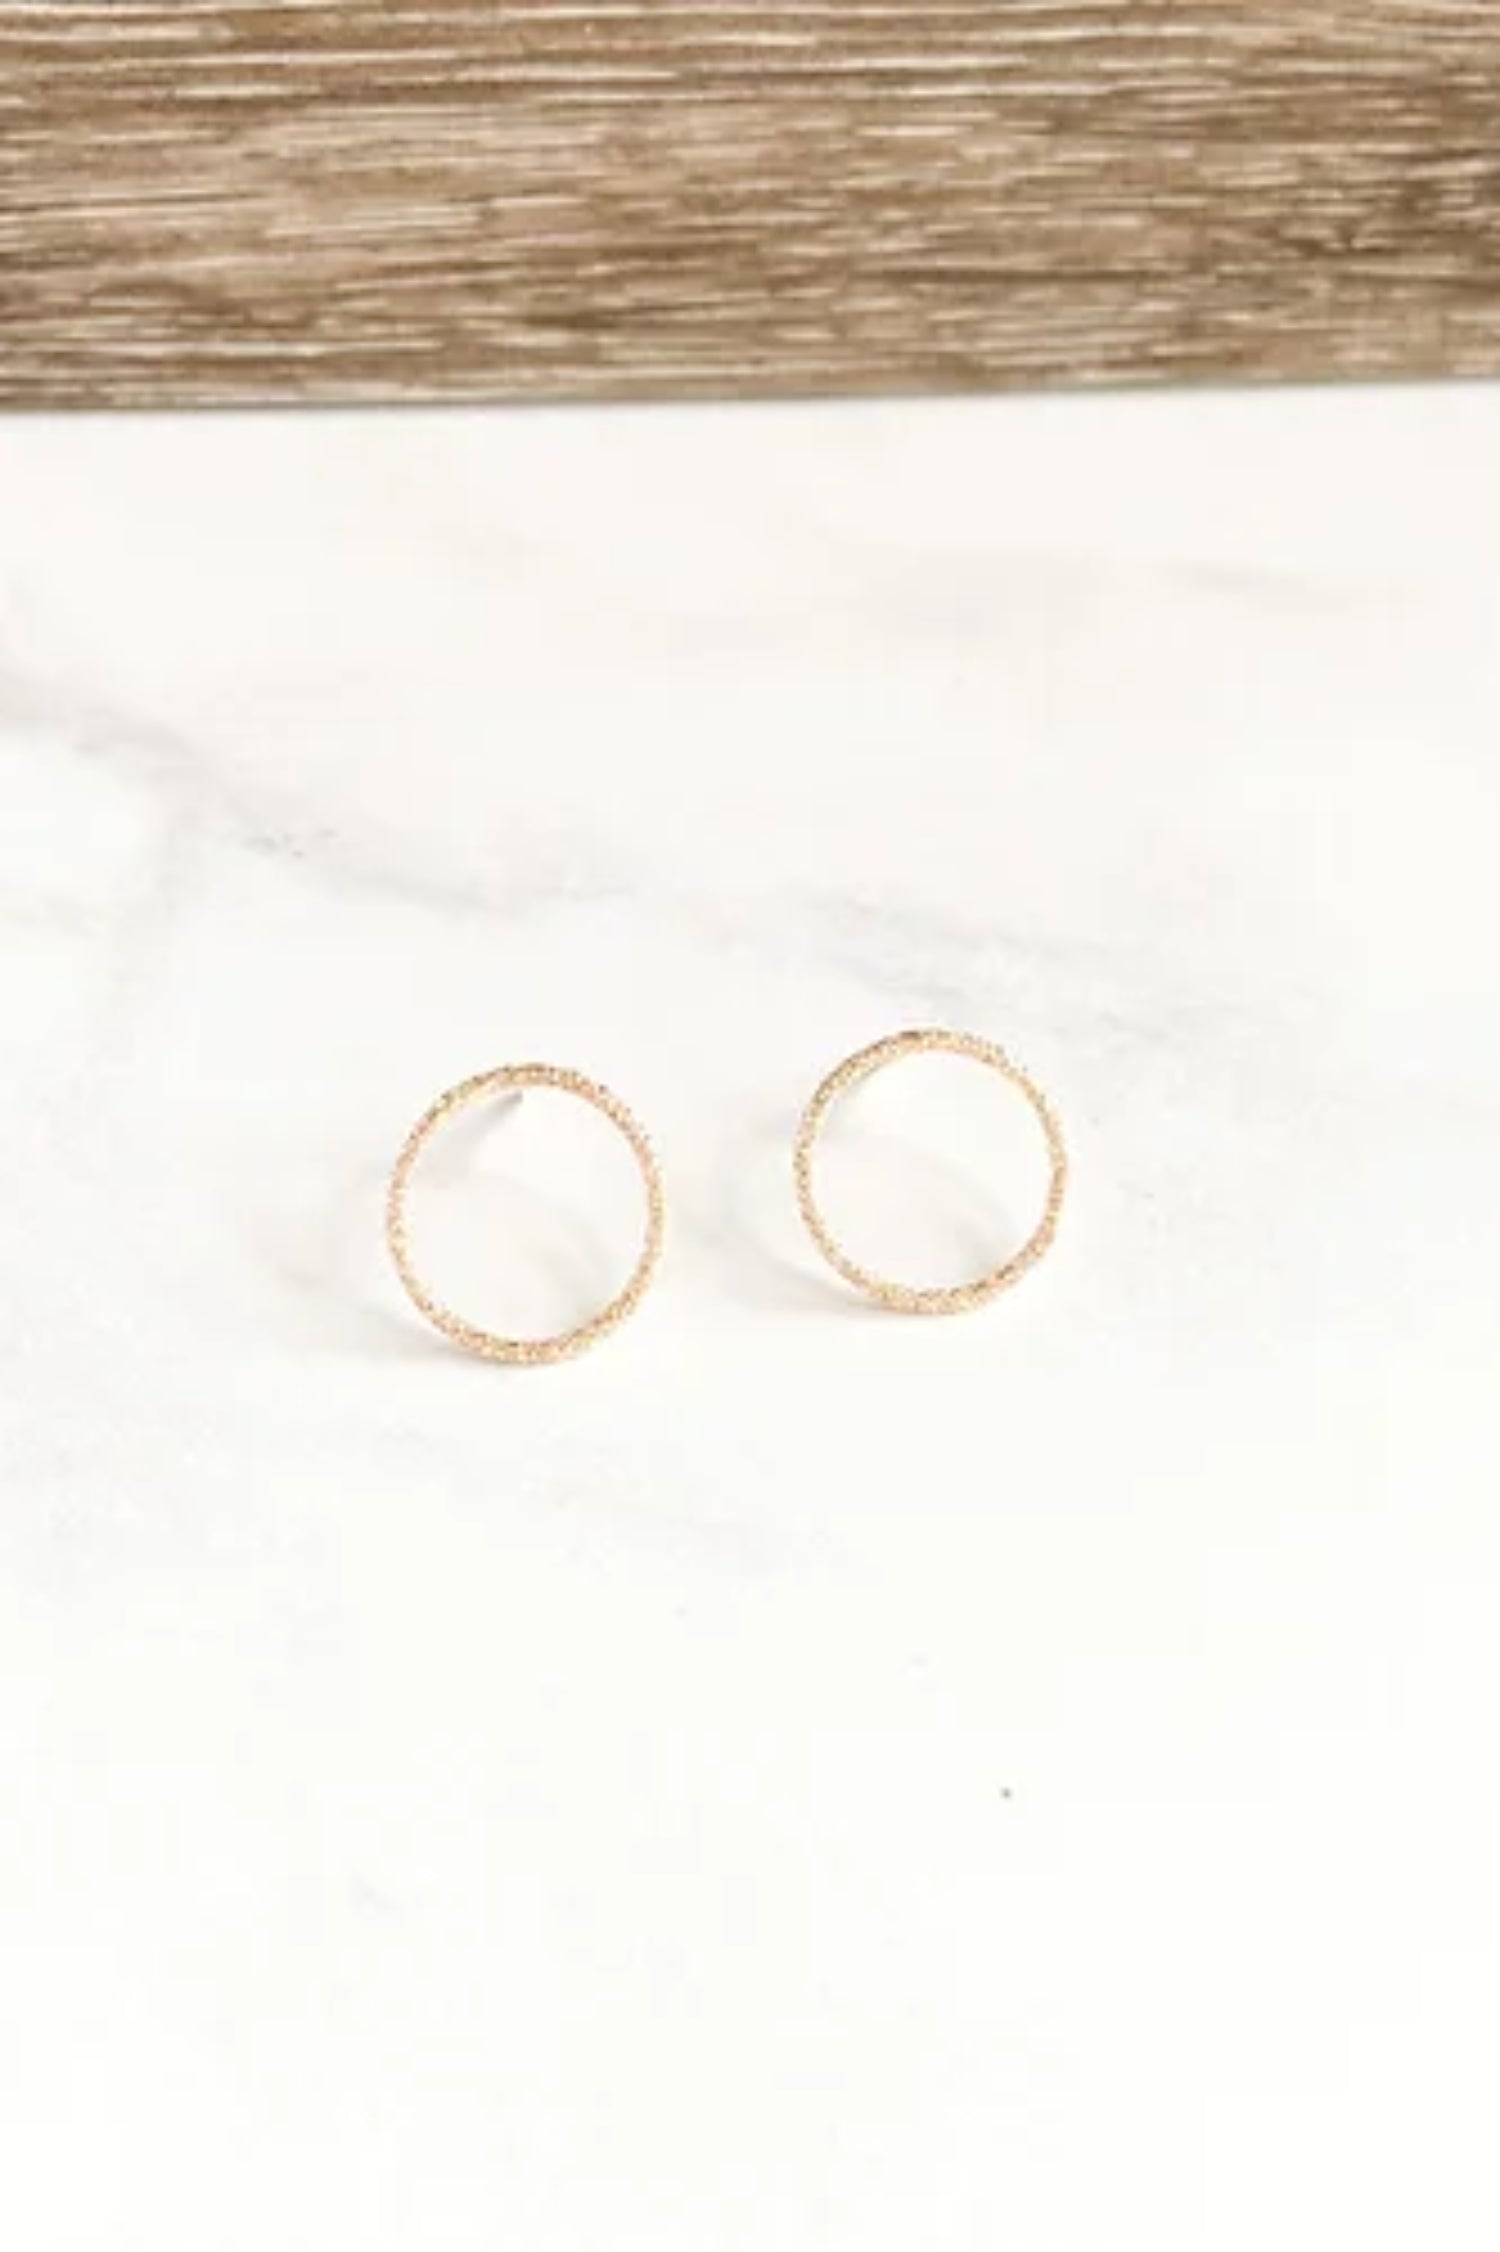 Gold Circle Stud Earrings by Flourish and Flame, 14k gold-fill